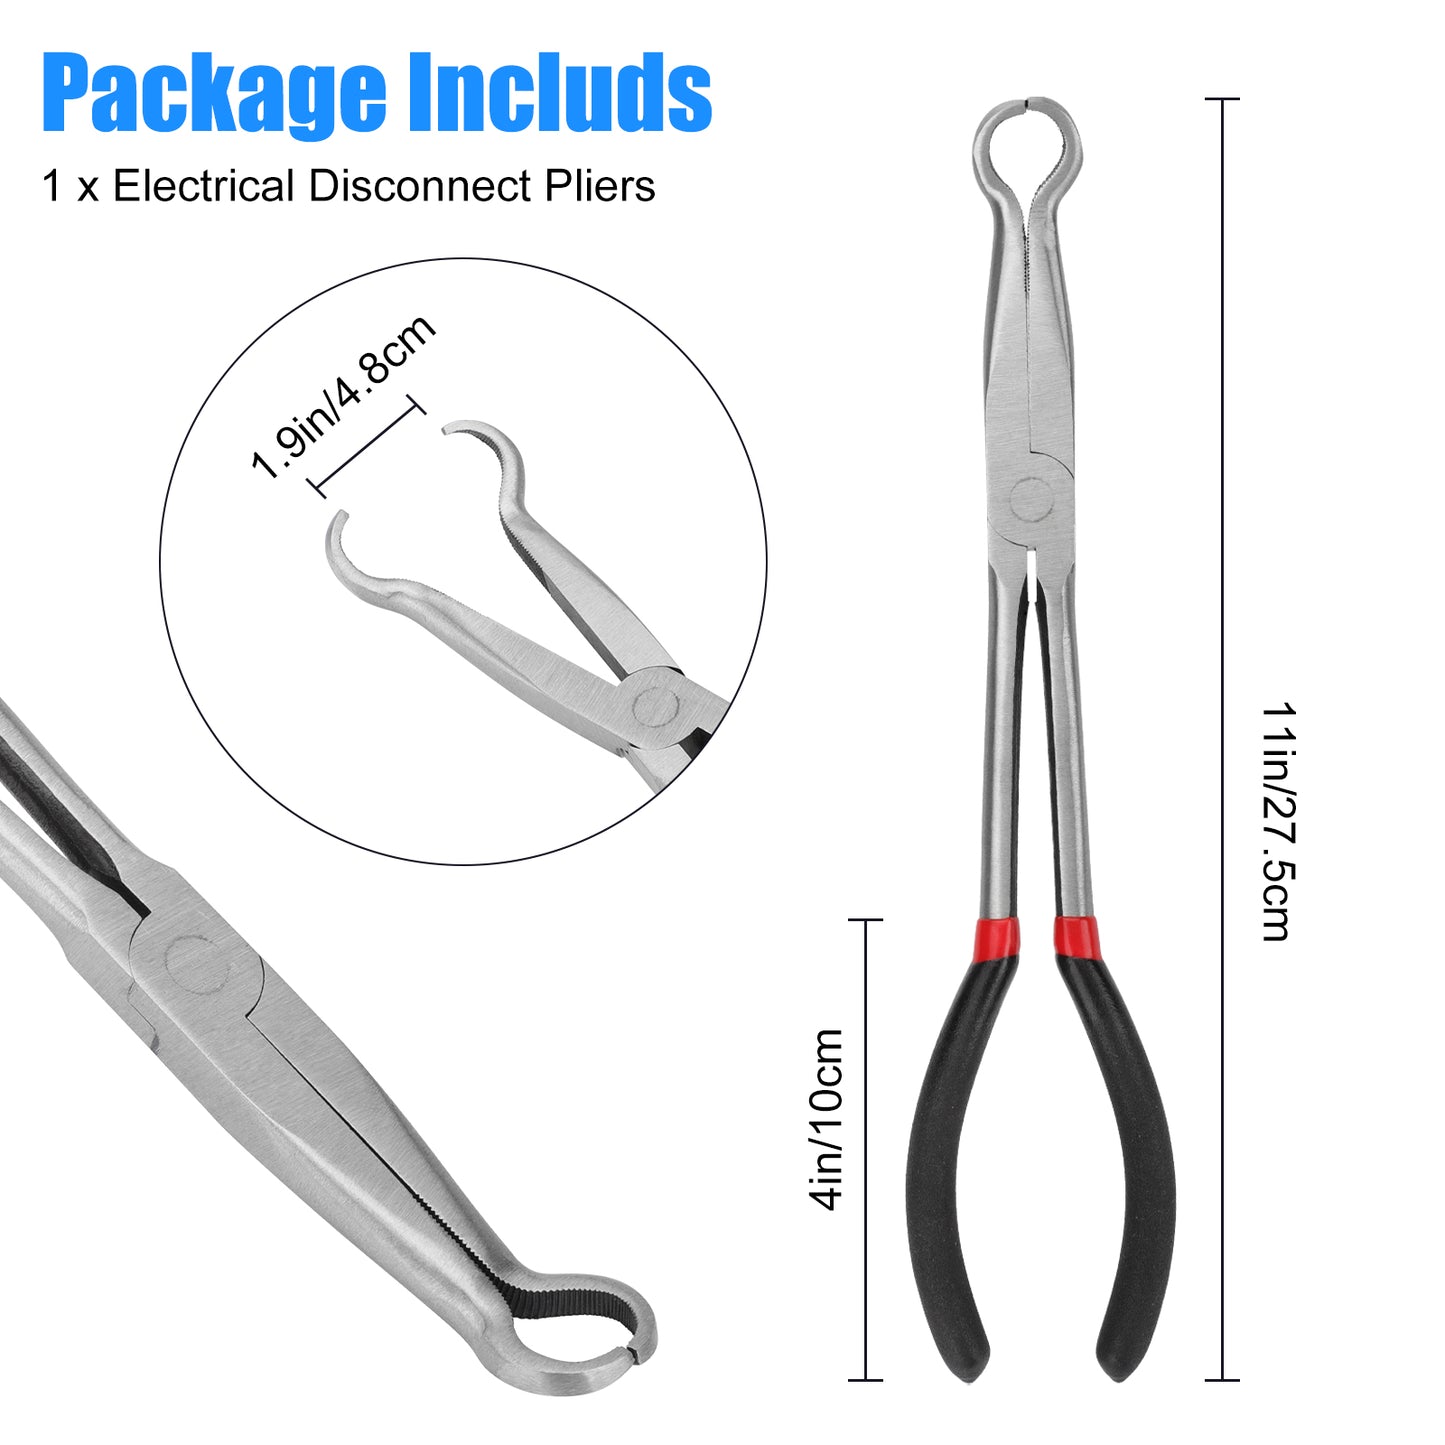 11 Inch Automotive Electrical Disconnect Pliers - Premium Carbon Steel, Non-Slip Handle,for spark plug covers, spark plug sheaths, hose clamps, vacuum pipes, fuel pipes, heater hoses Removal Tool